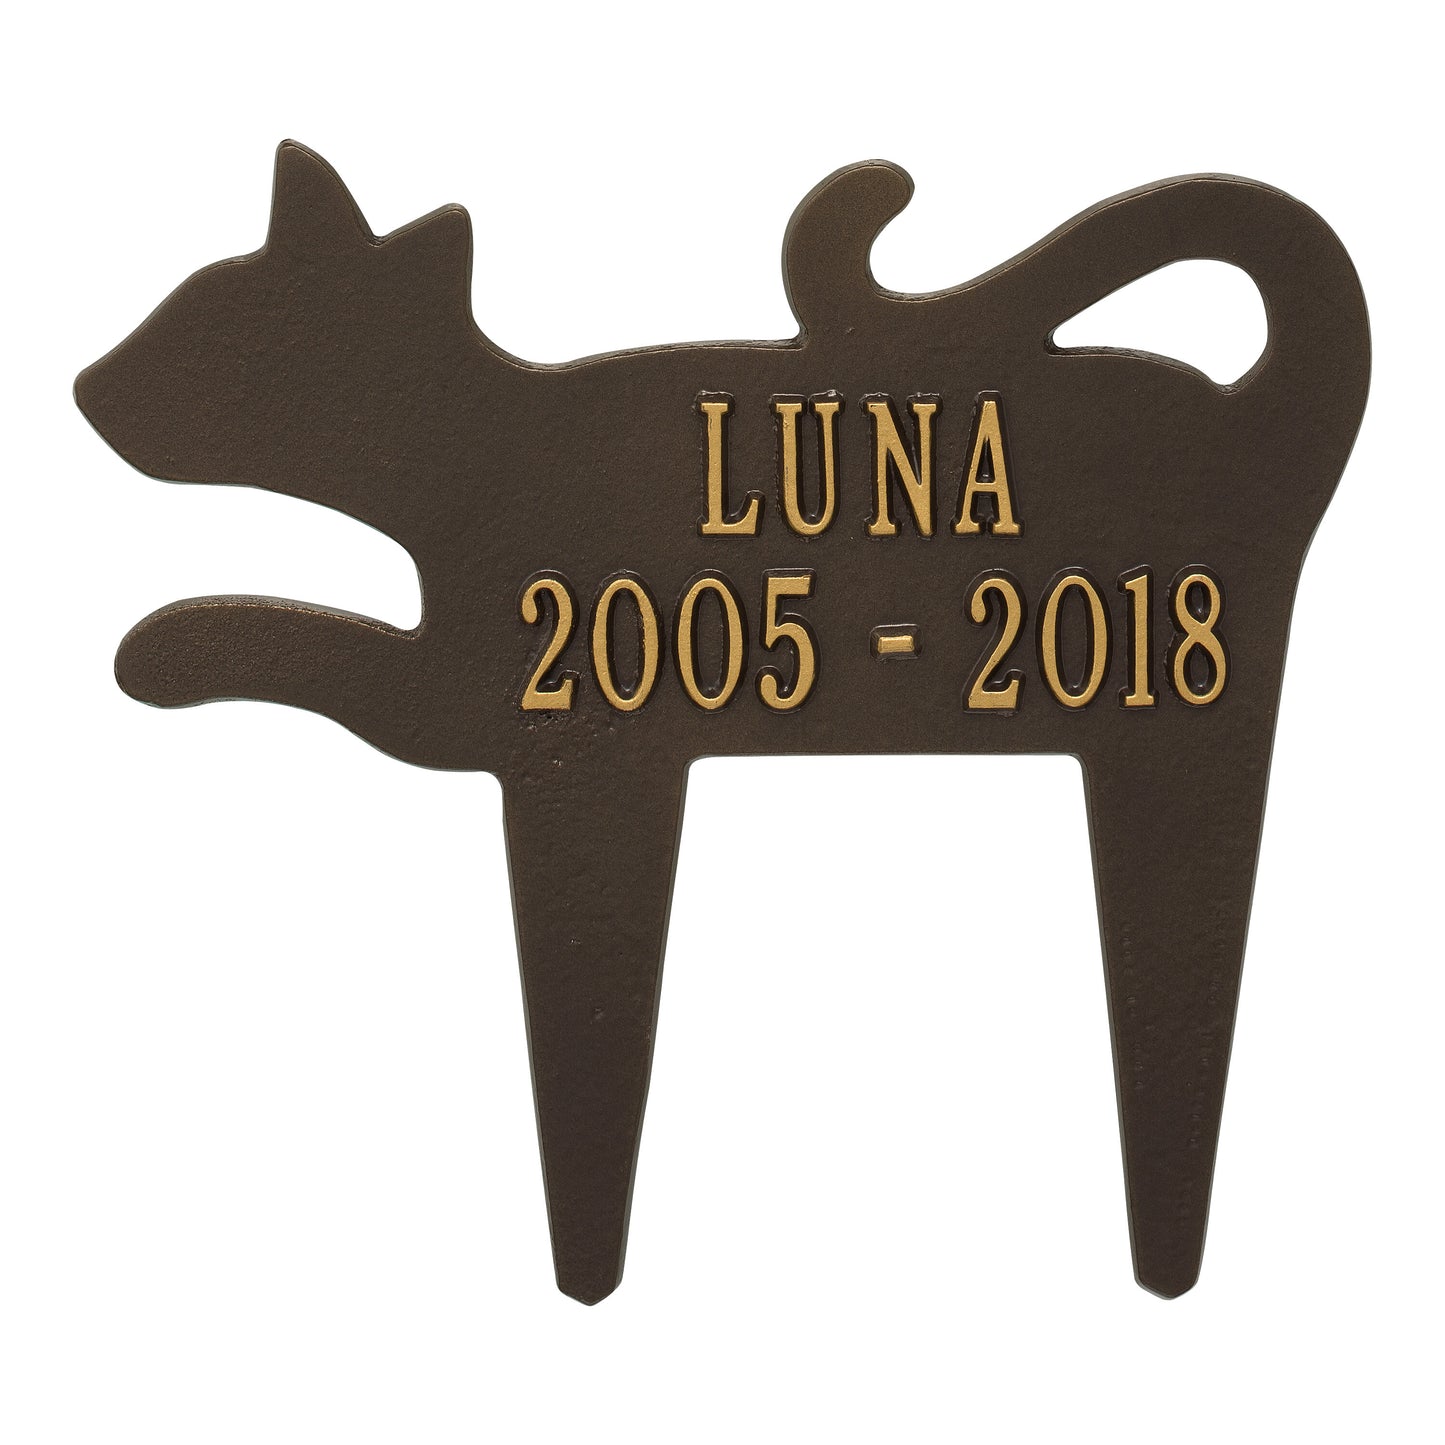 Whitehall Products Cat Silhouette Pet Memorial Personalized Lawn Plaque Two Lines White/black